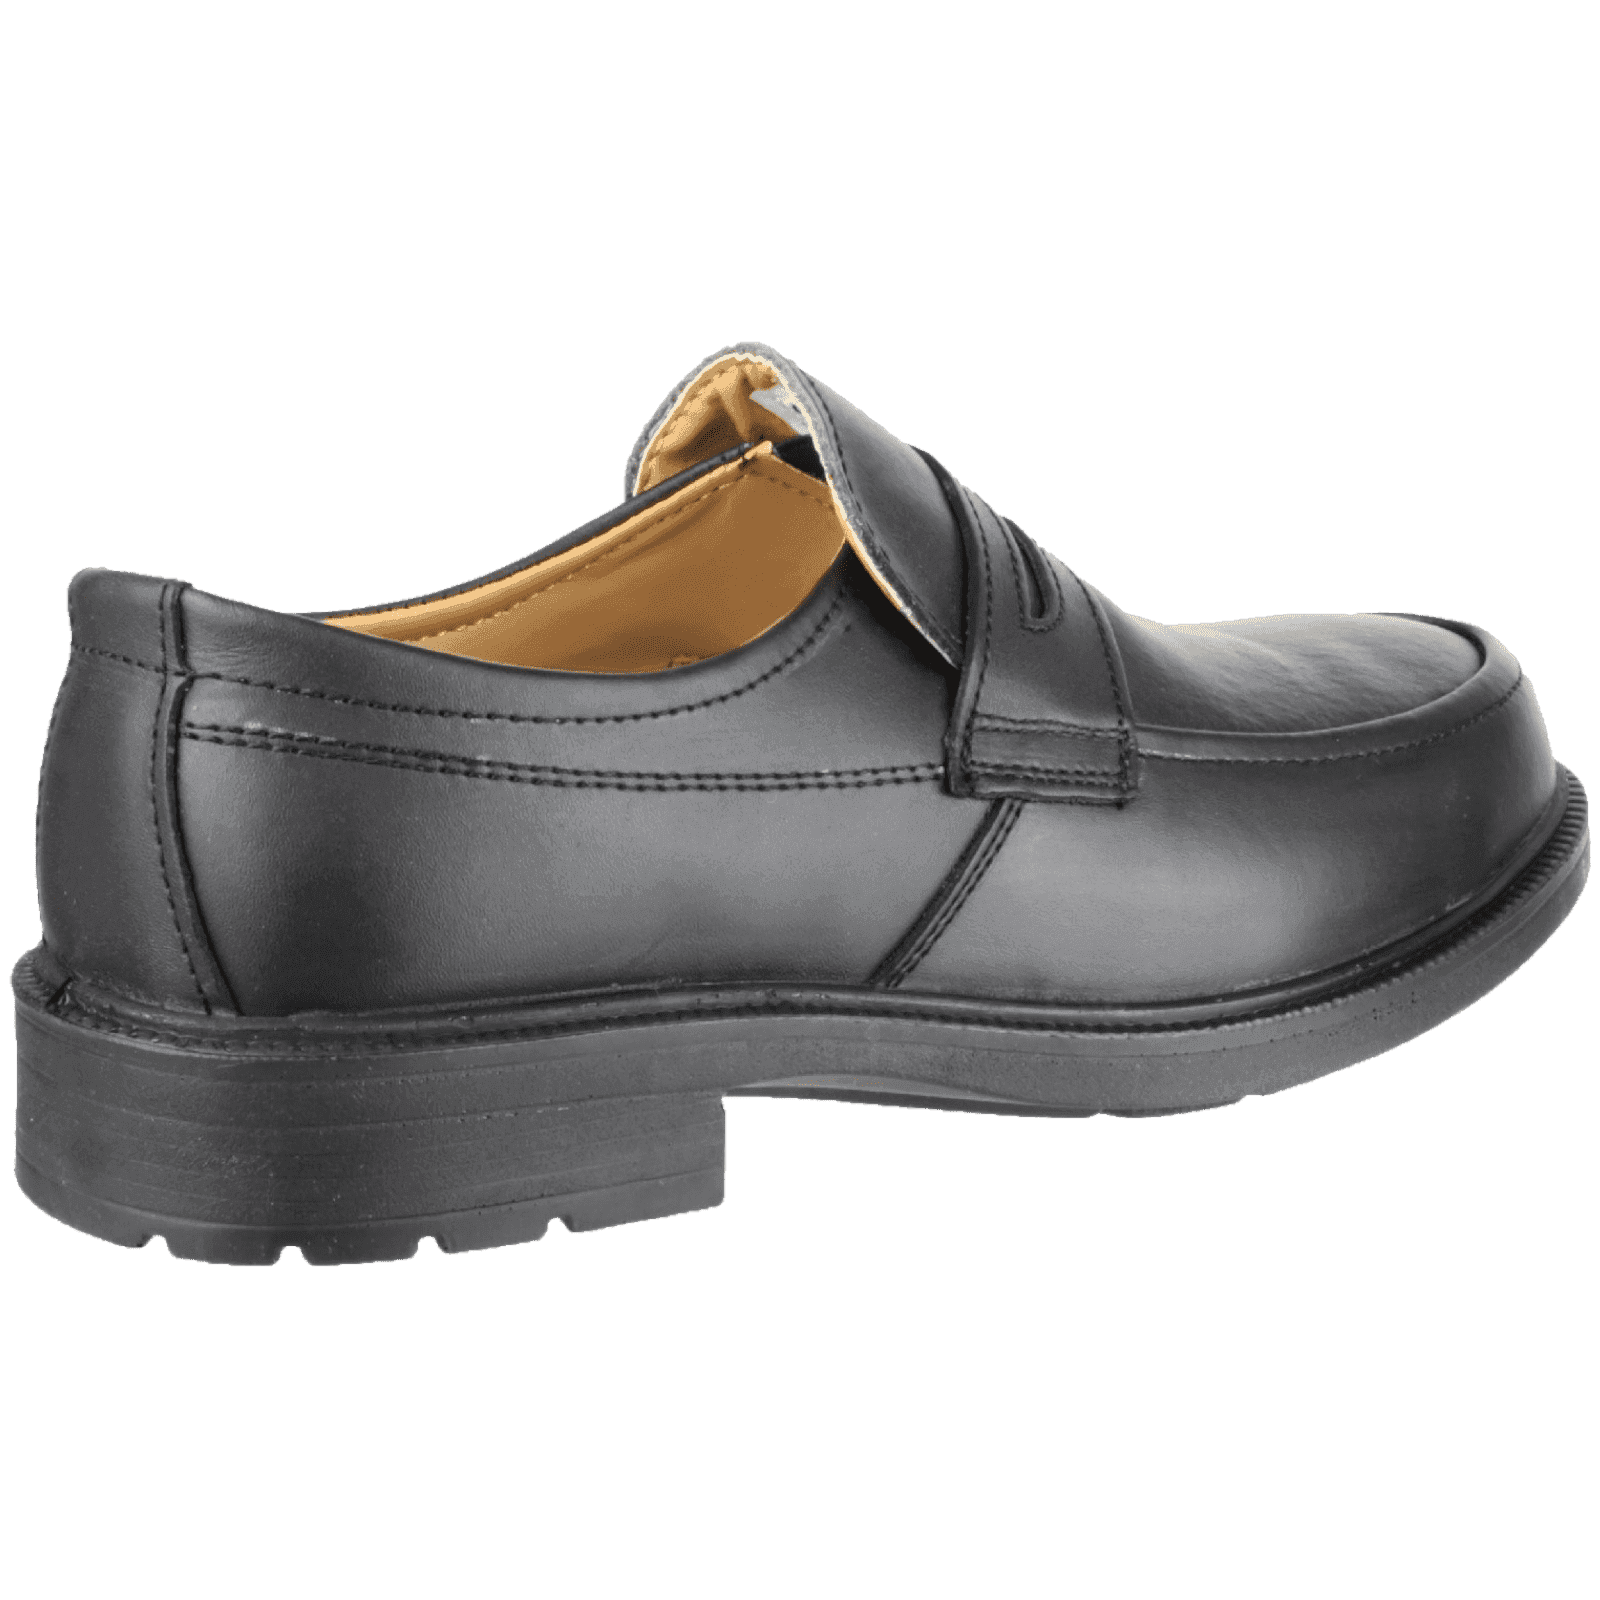 Moccasin Safety Shoes Amblers FS46